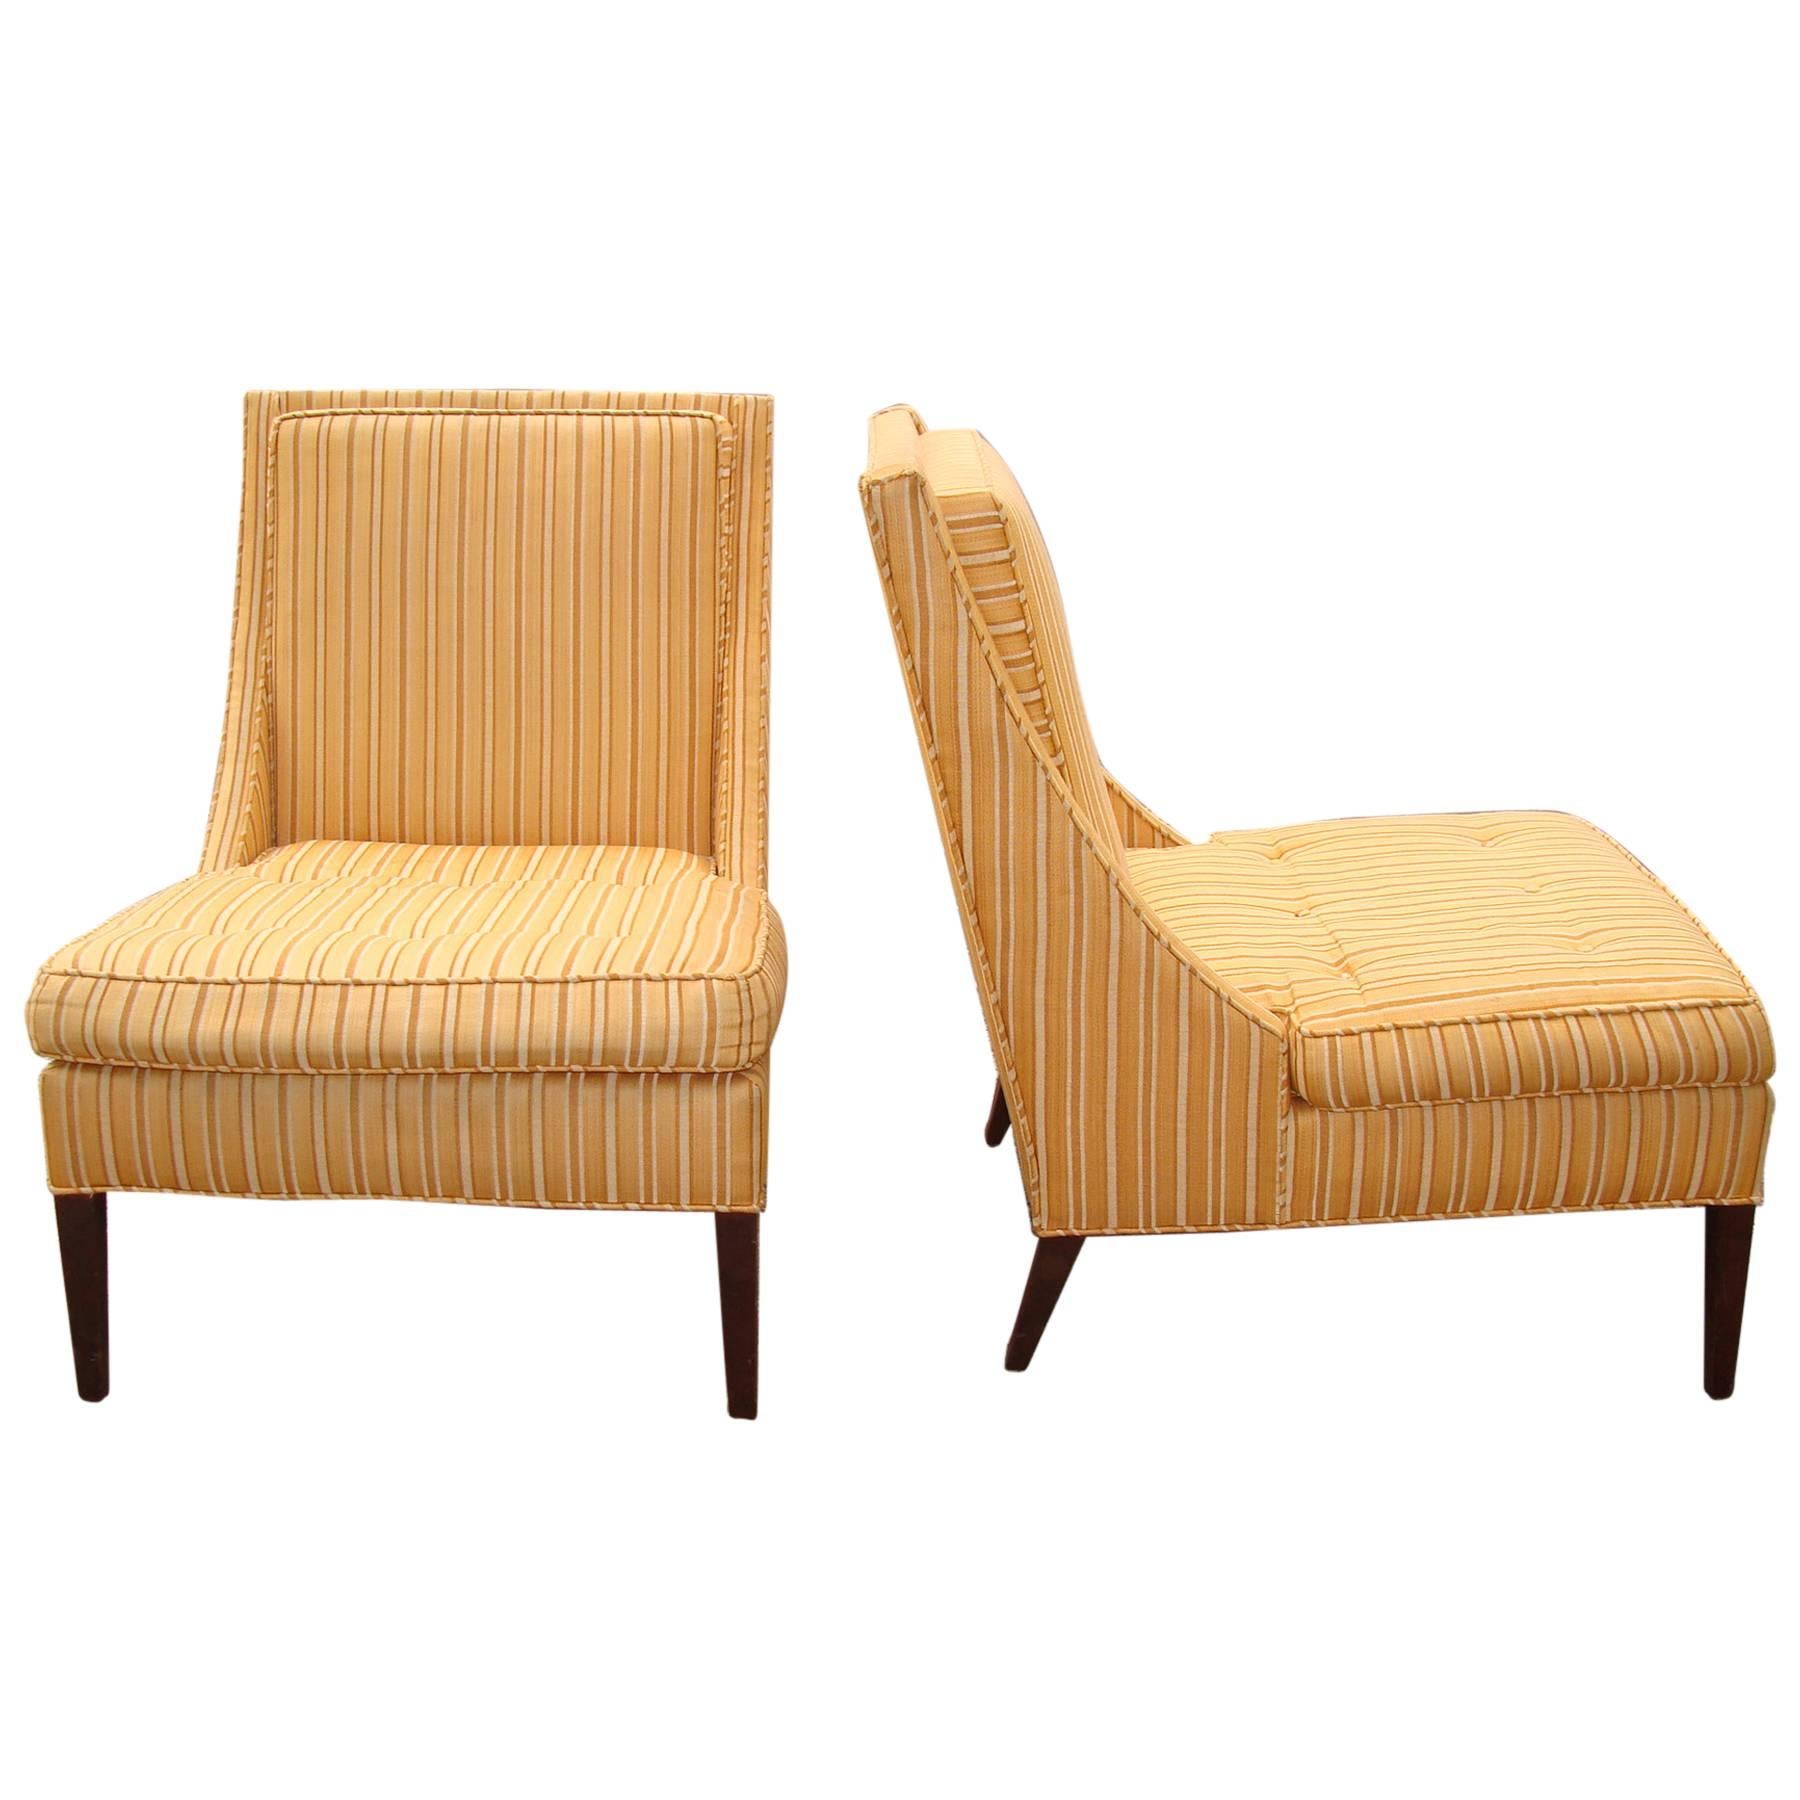 Pair of Mid-Century Slipper Chairs For Sale